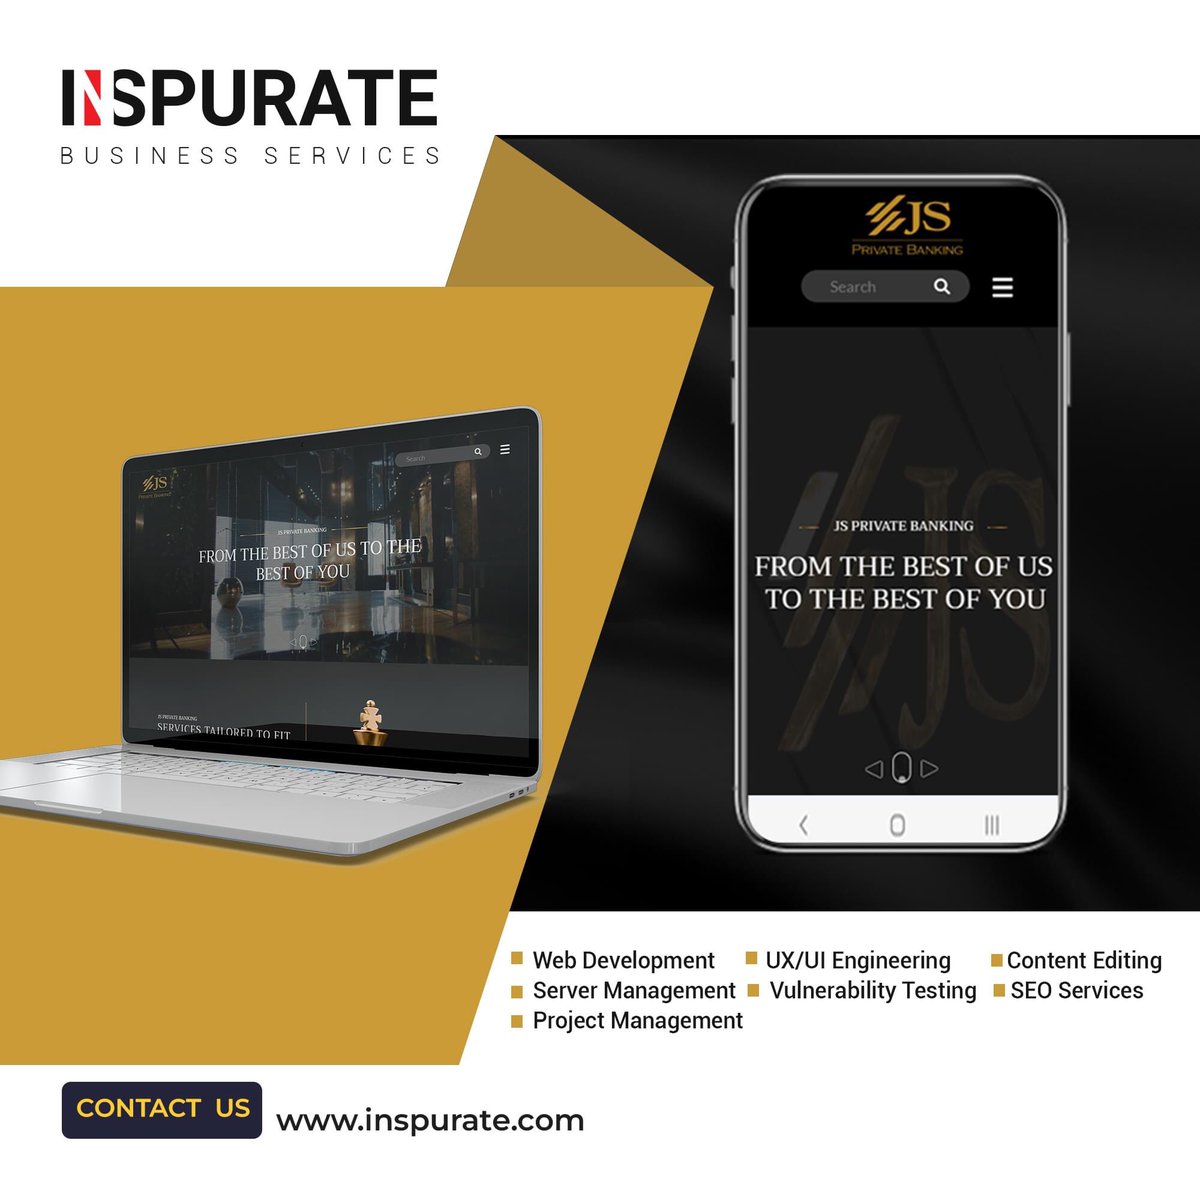 We are delighted to announce the launch of #JSPrivateBanking’s new digital presence, a service by #JSBank 

inspurate.com/js-private-ban…

#PrivateBanking #Banking #Inspurate #website #websevelopment